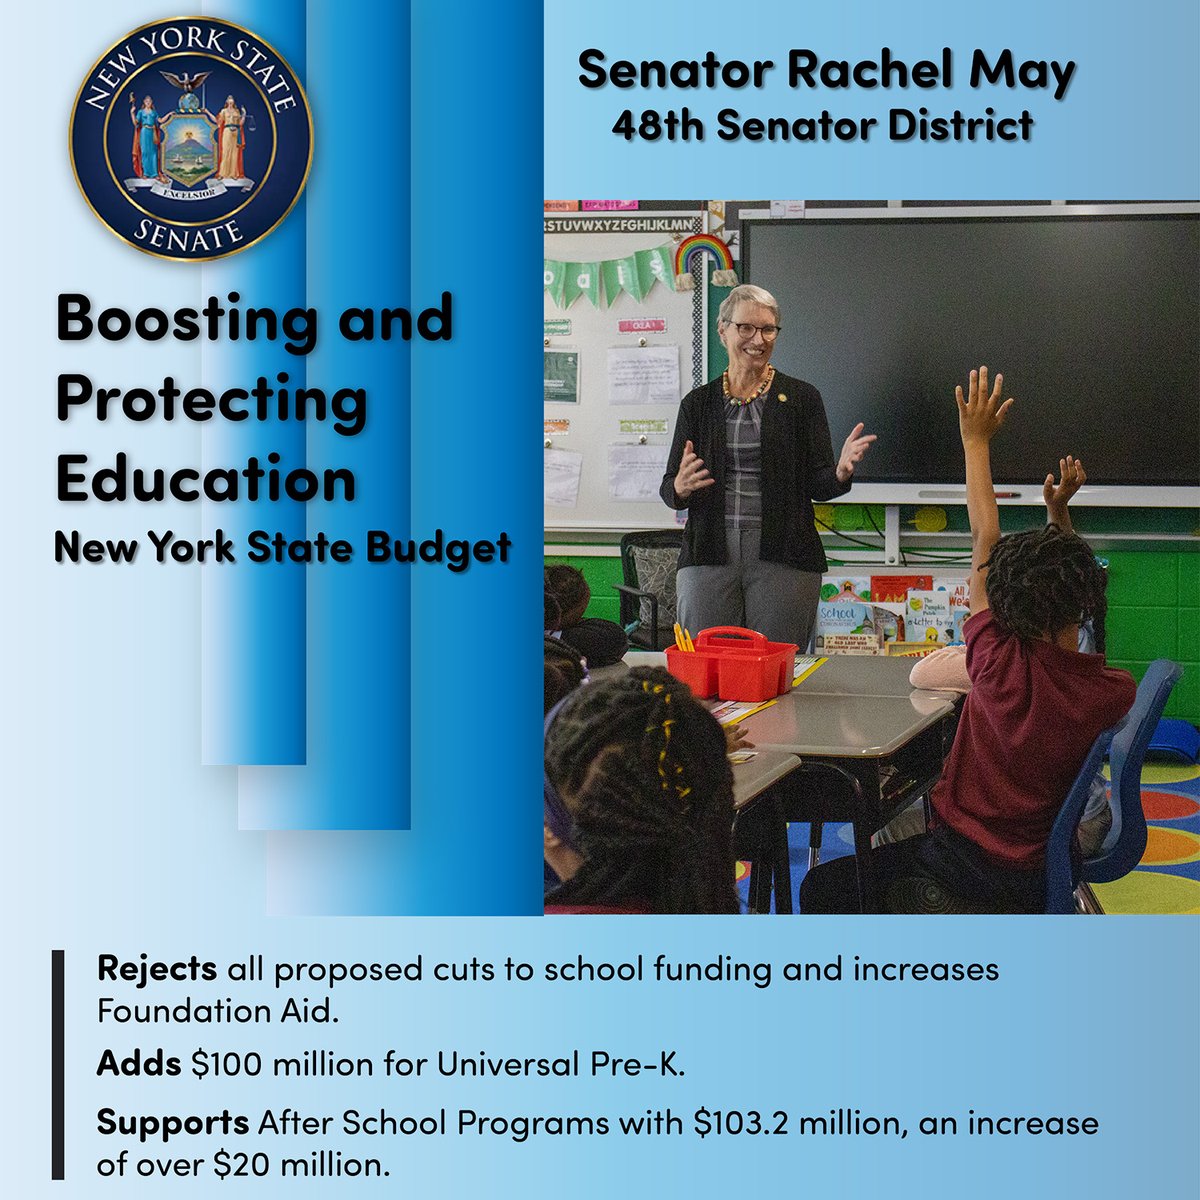 New York State's commitment to fully fund our public schools will positively impact students, teachers, and families across the 48th Senate District. We must continue prioritizing these efforts, as our children's education and future depend on them.